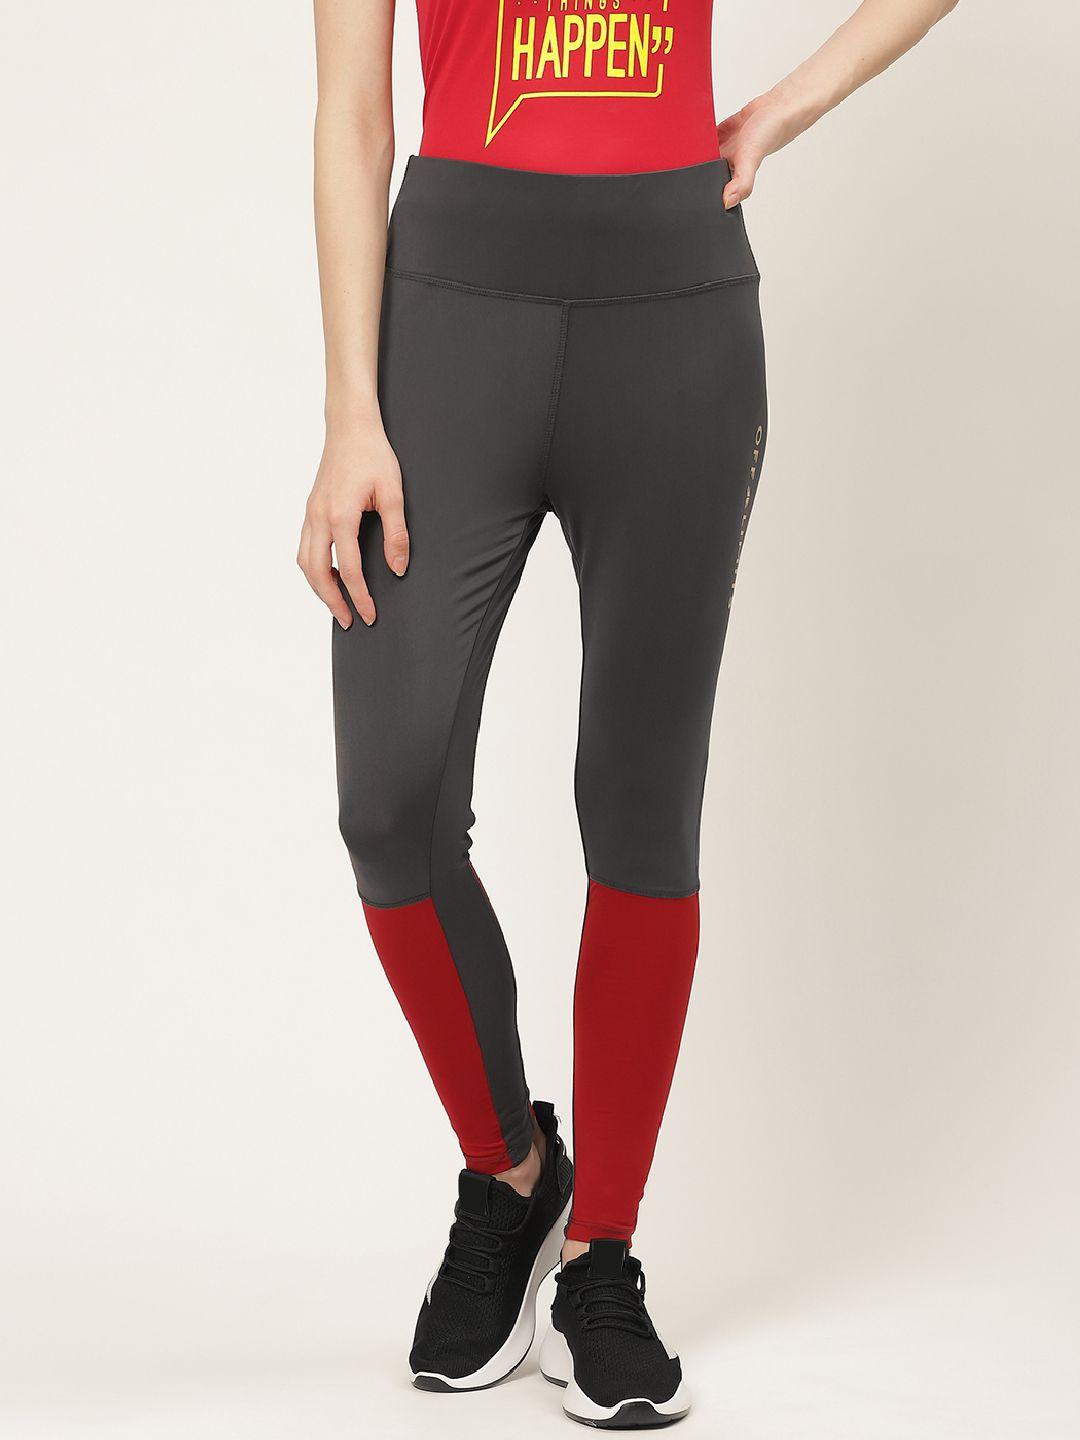 off limits women charcoal grey & red colourblocked gym tights